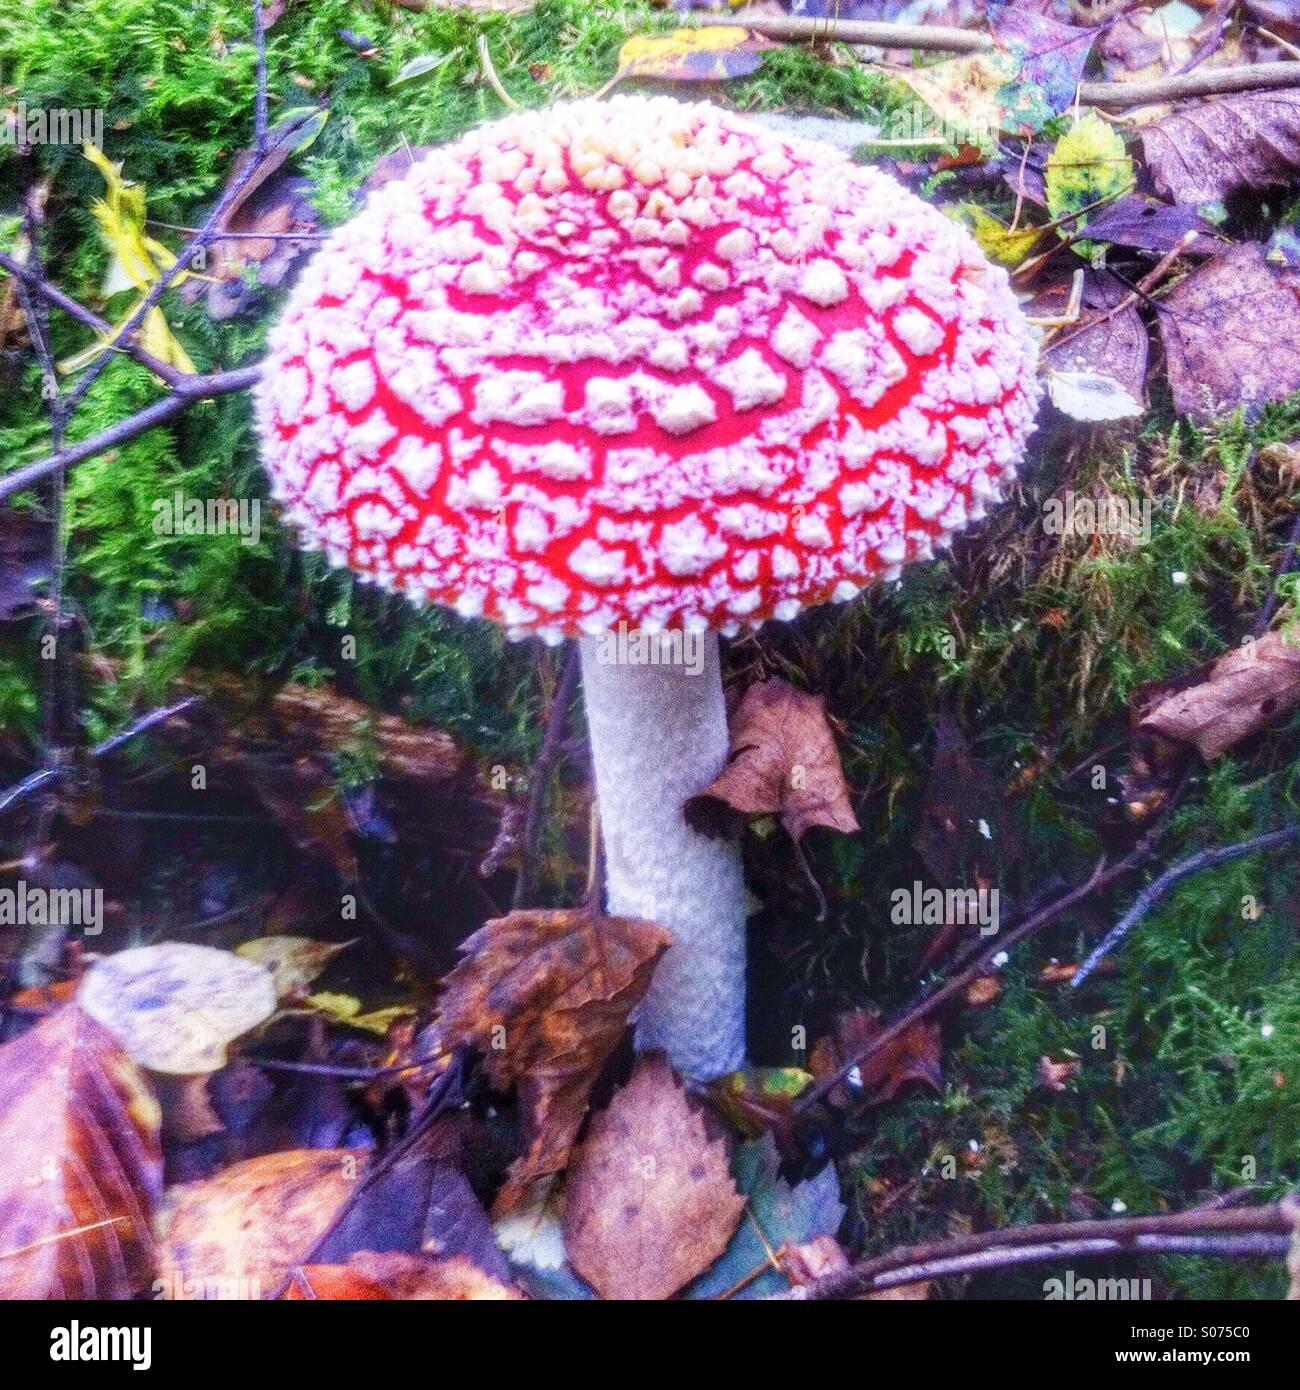 Fly Agaric mushroom (Amanita muscaria) iconic and distinctive British fungi renowned for its toxicity and hallucinogenic properties. Stock Photo